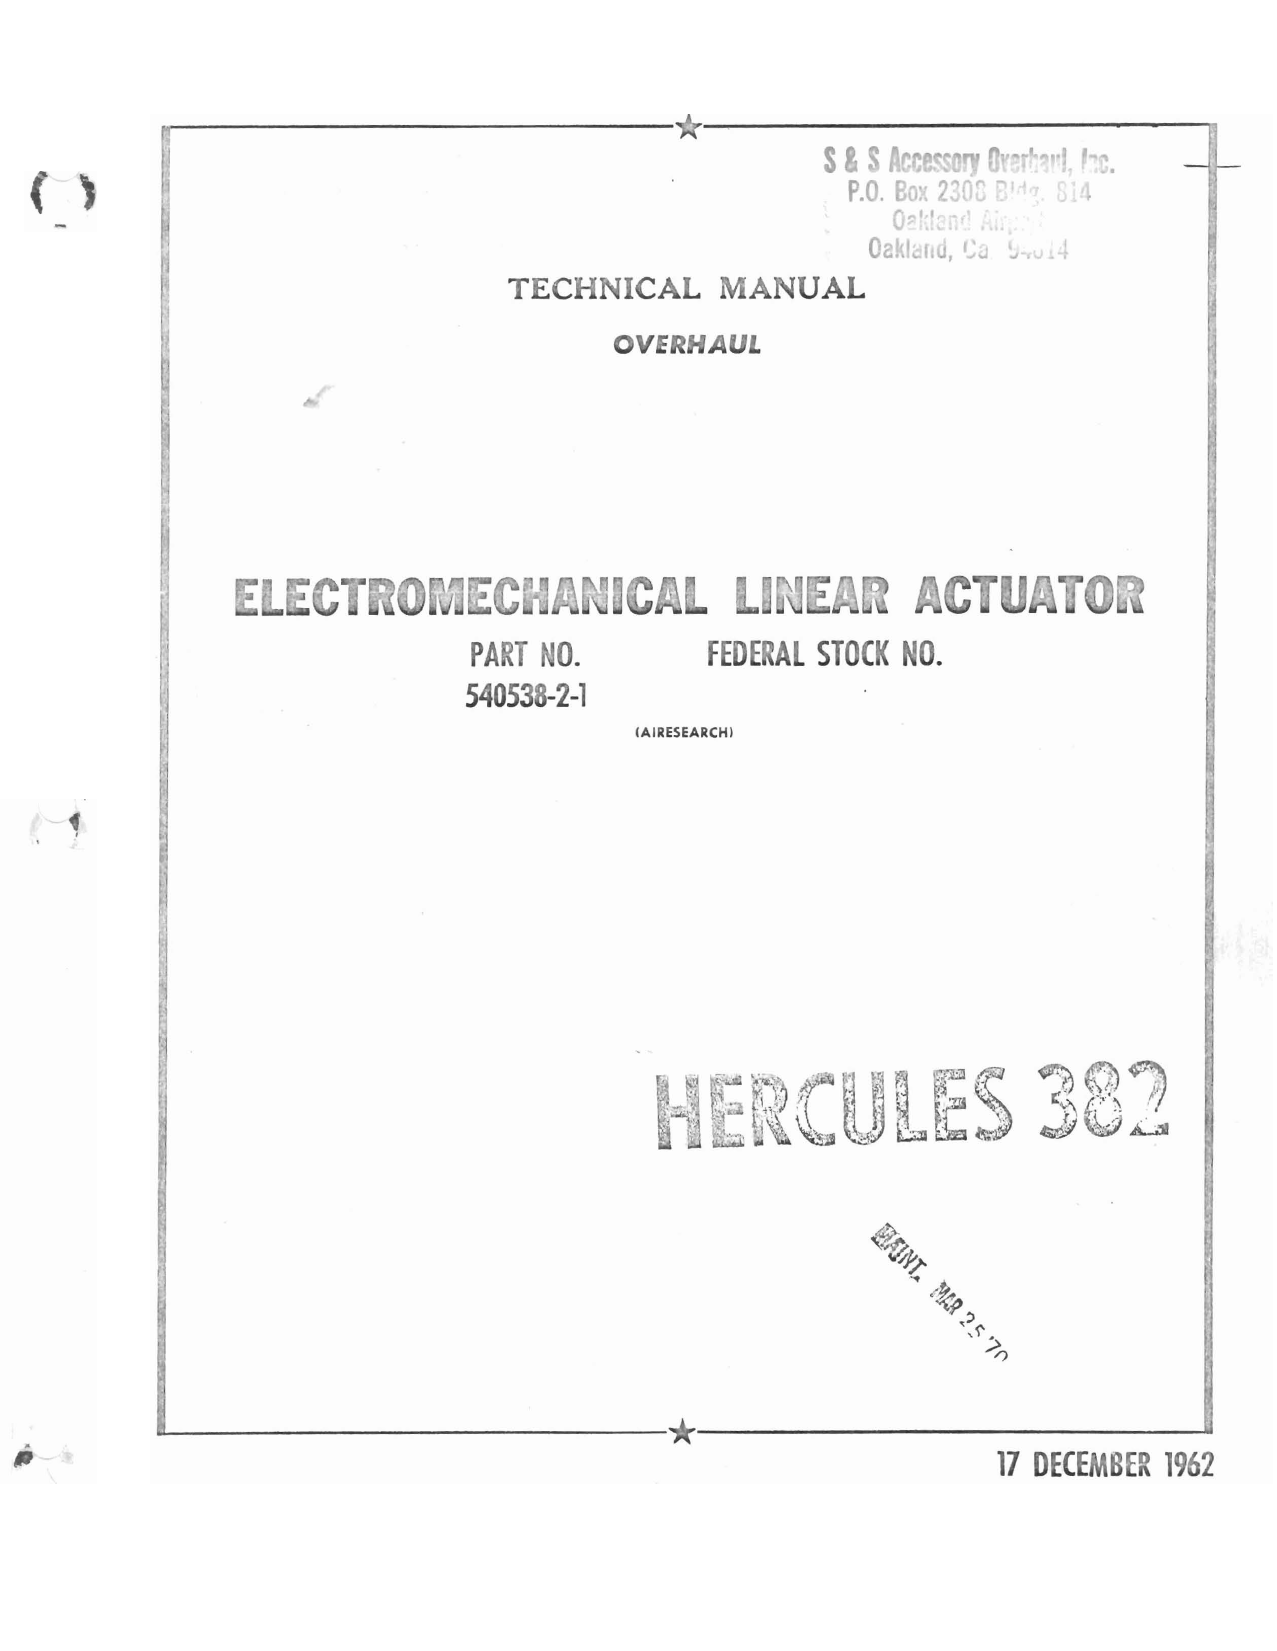 Sample page 1 from AirCorps Library document: Electromechanical Linear Actuator - Parts 540538-2-1 